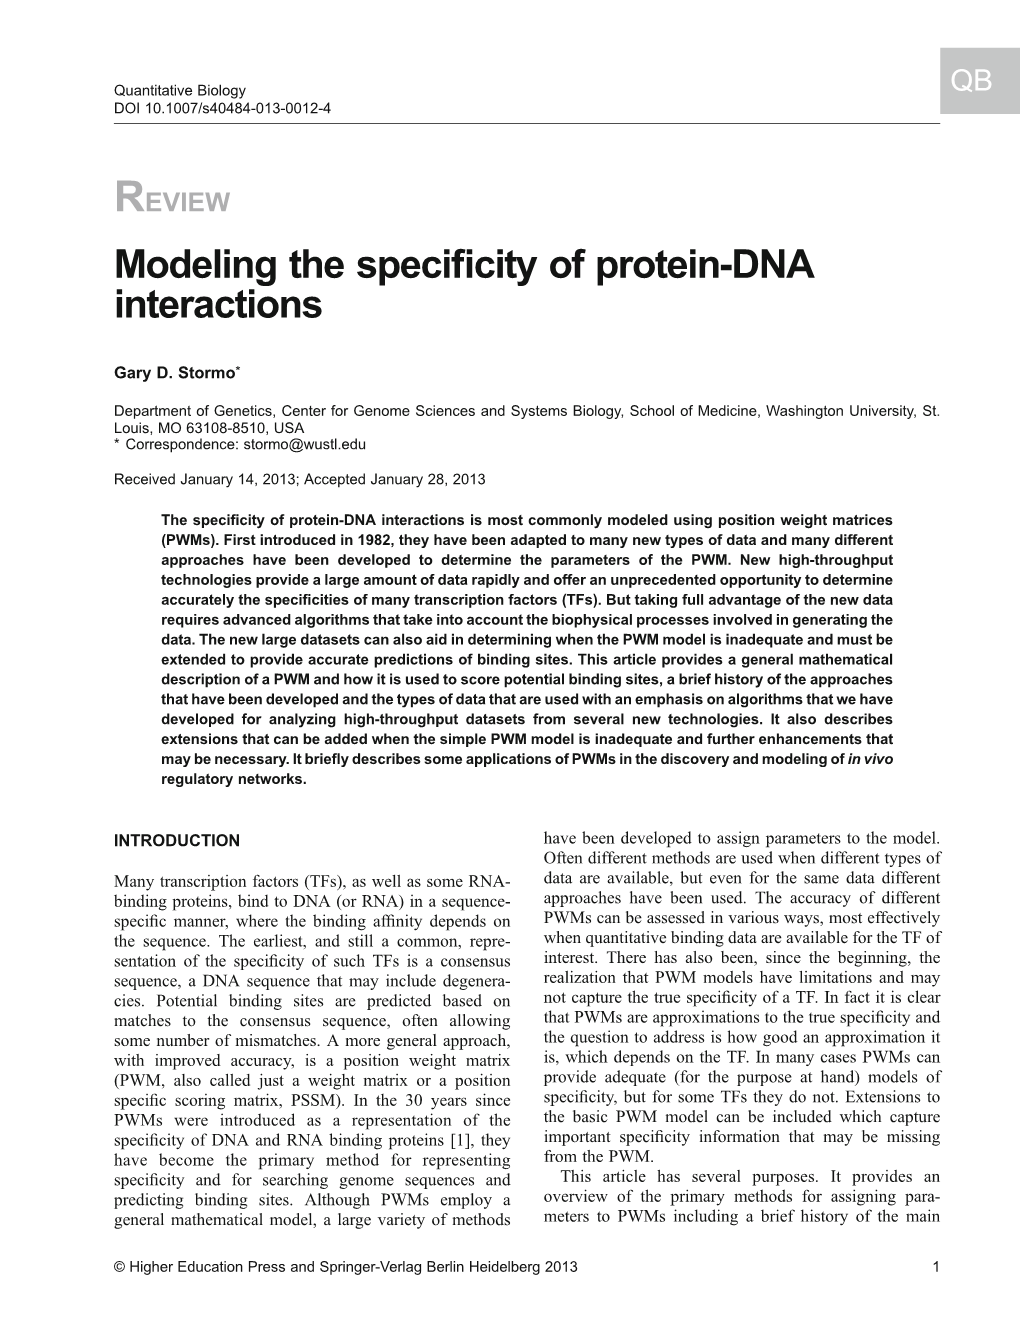 Modeling the Specificity of Protein-DNA Interactions